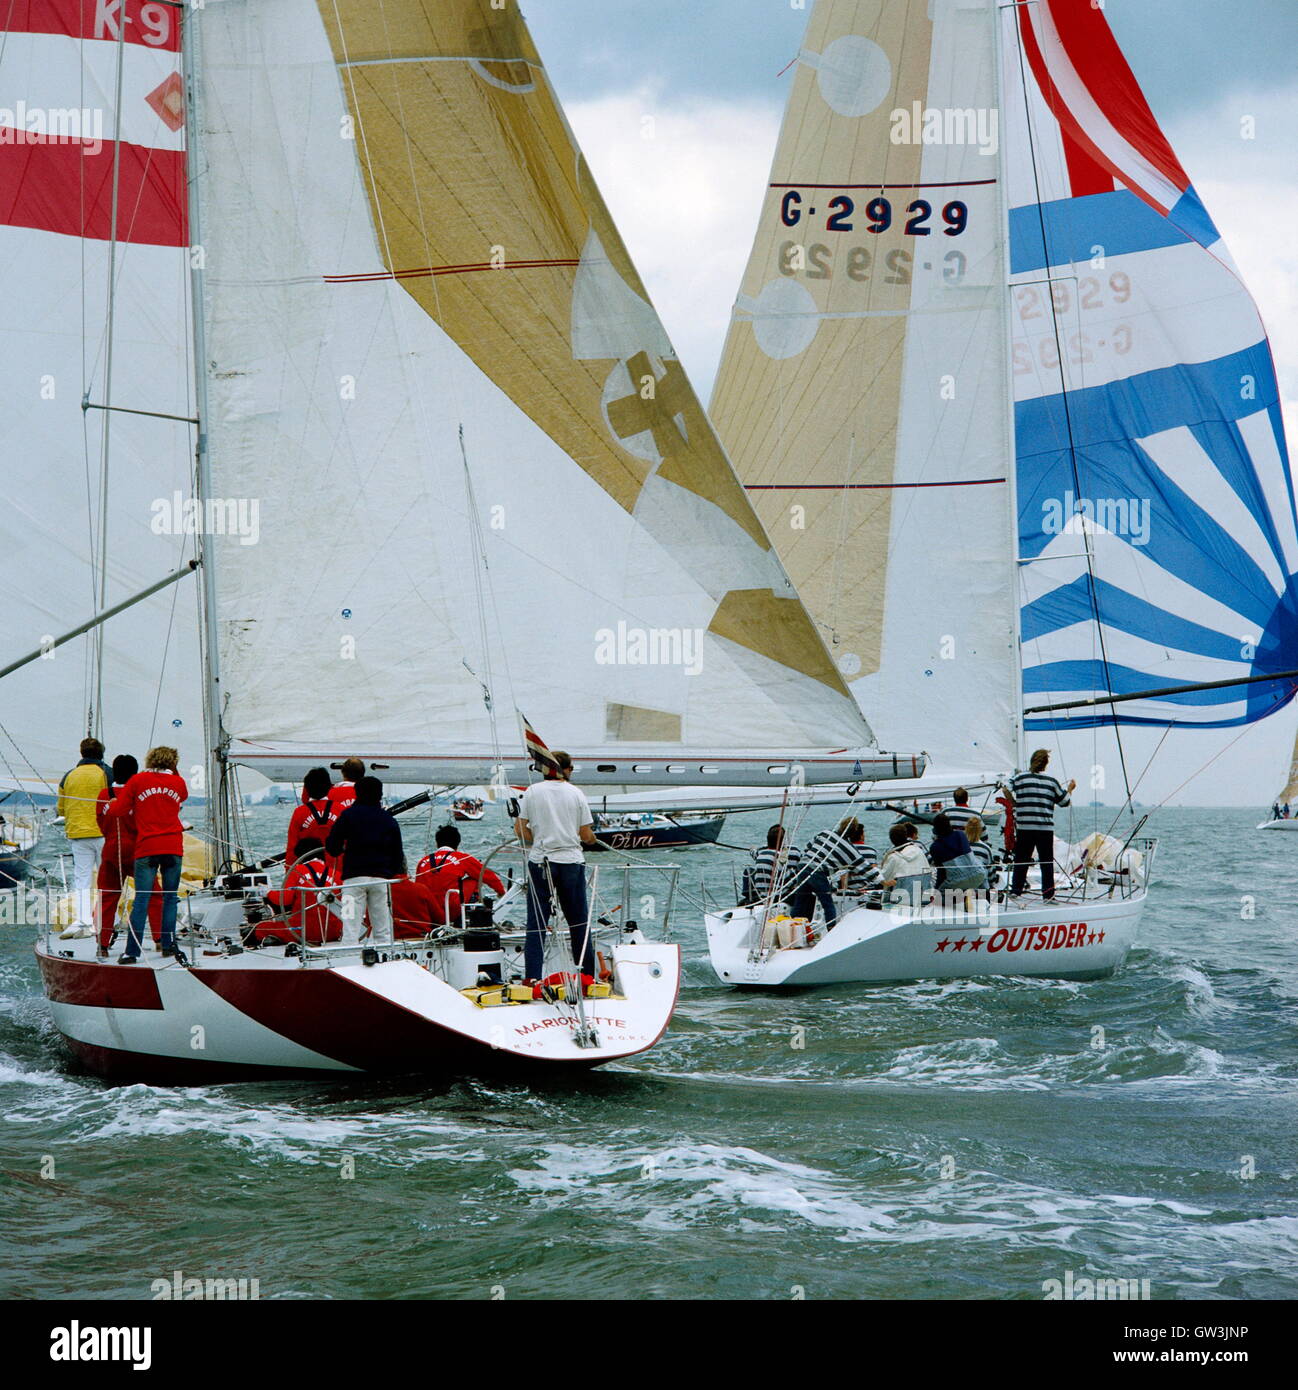 AJAXNETPHOTO. 1985. SOLENT, ENGLAND. - ADMIRAL'S CUP - SINGAPORE TEAM YACHT MARIONETTE AND GERMANY'S OUTSIDER.   PHOTO:JONATHAN EASTLAND/AJAX  REF:MARIONETTE 1985 Stock Photo